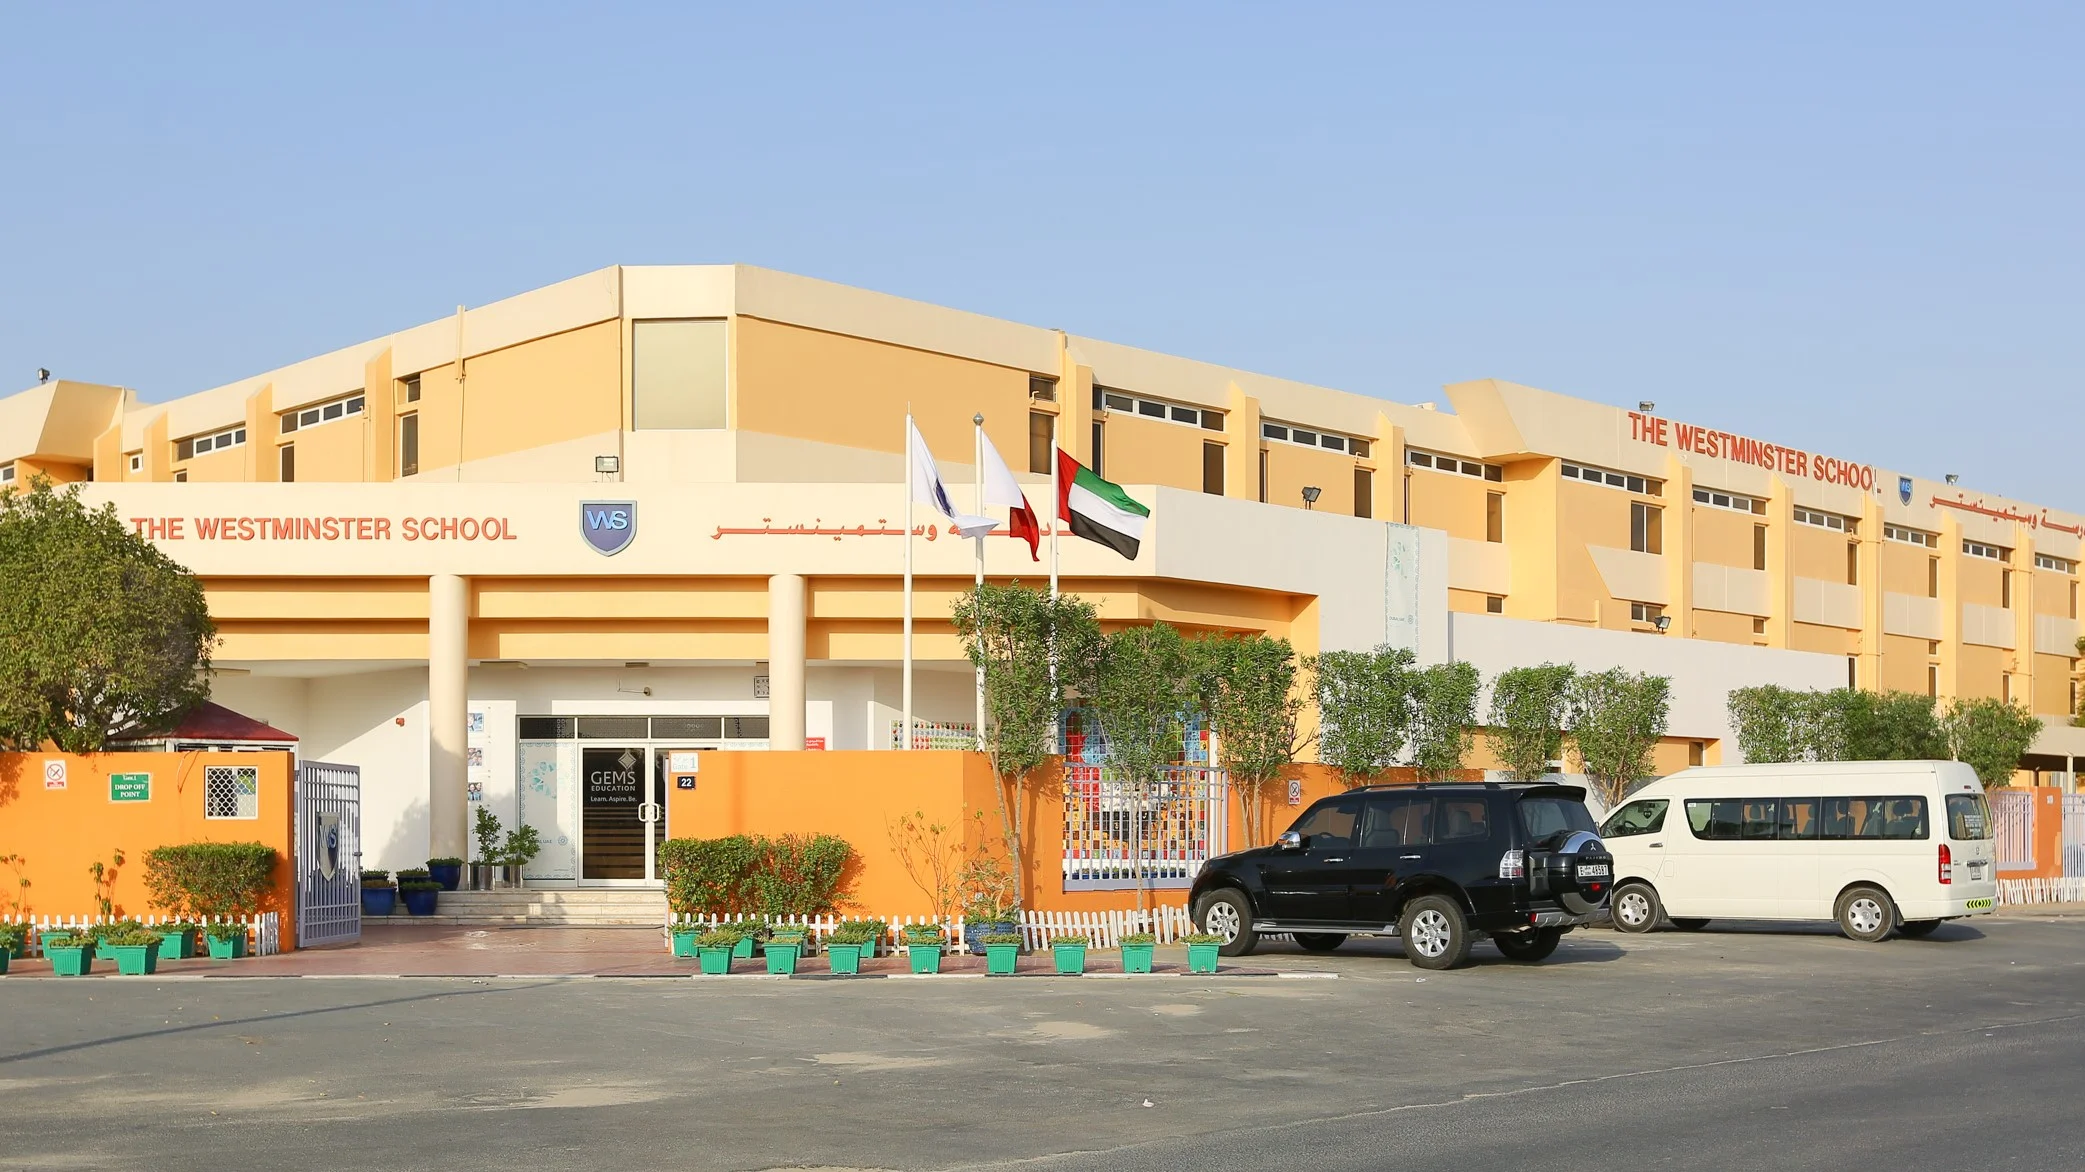 The Westminster School in Dubai stands out as an exceptional choice for students seeking an international education, focusing on preparing them for the International General Certificate of Secondary Education (IGCSE), Advanced Subsidiary (AS) Level Qualifications and A Level Qualifications from prestigious UK universities like Cambridge and London.